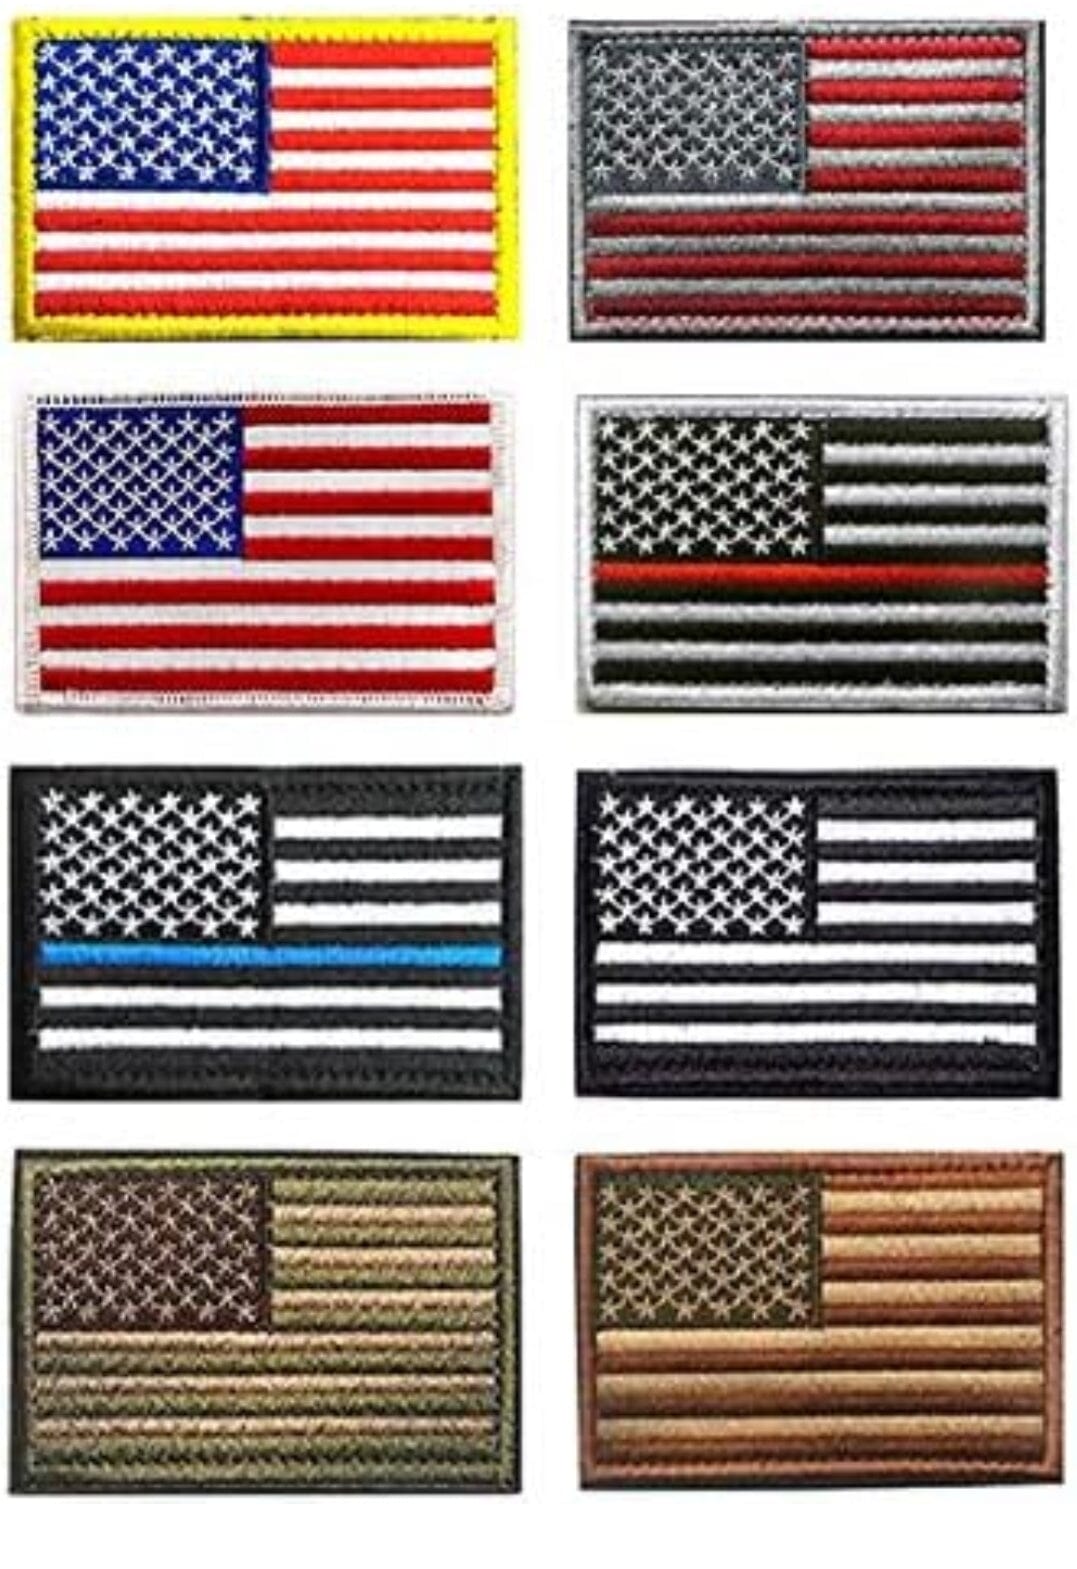 [8 Pack] 2x3" American Flag & Patriotic Velcro Embroidered Patches : Freedom Band Hook & Loop Patch Bands For Diabetics 